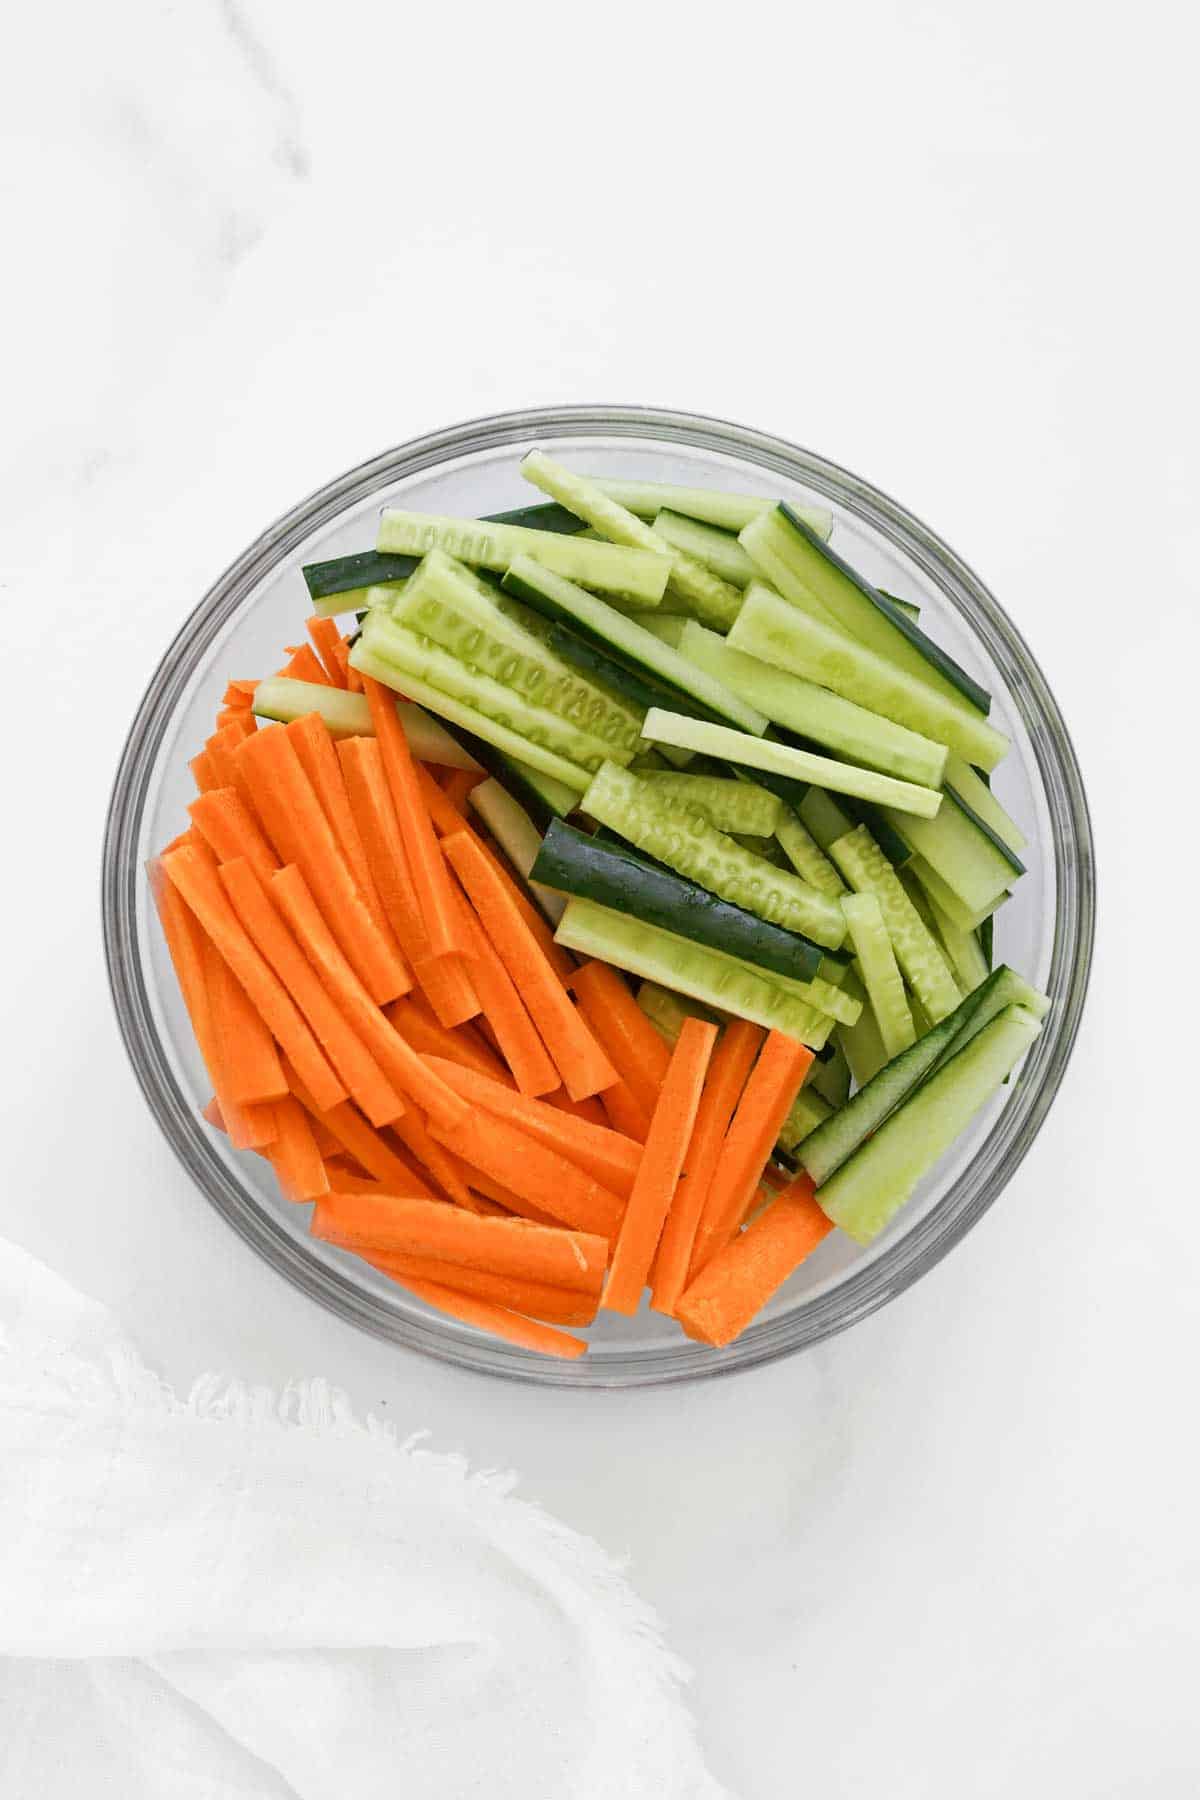 A bowl of sliced cucumbers and carrots on a white surface.